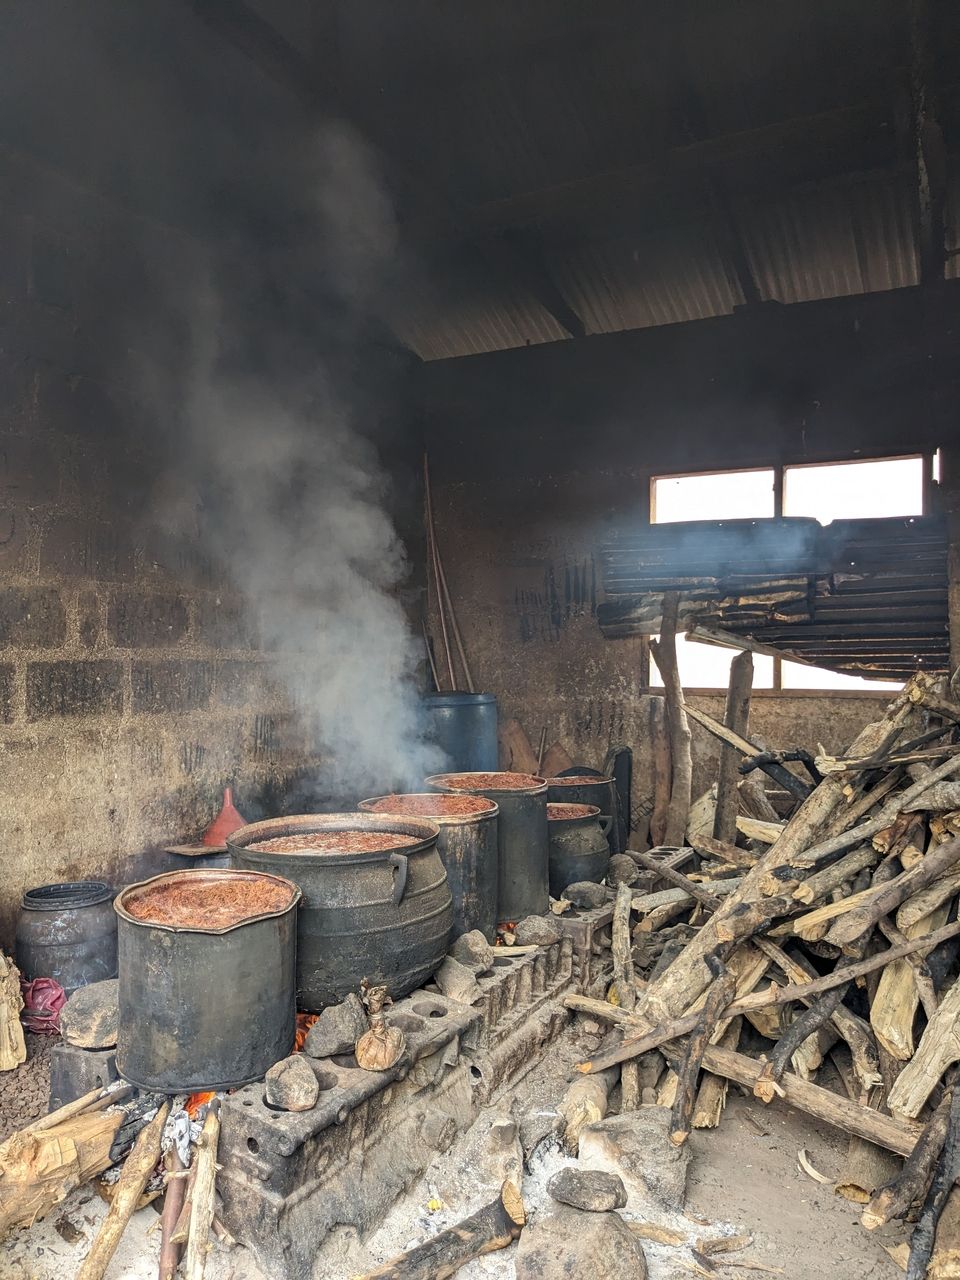 Pounded tree bark left on fire to boil in pots. In the makeshift kitchen is also a pile of firewood used for making fire. Boiling the pounded tree bark produces dye.